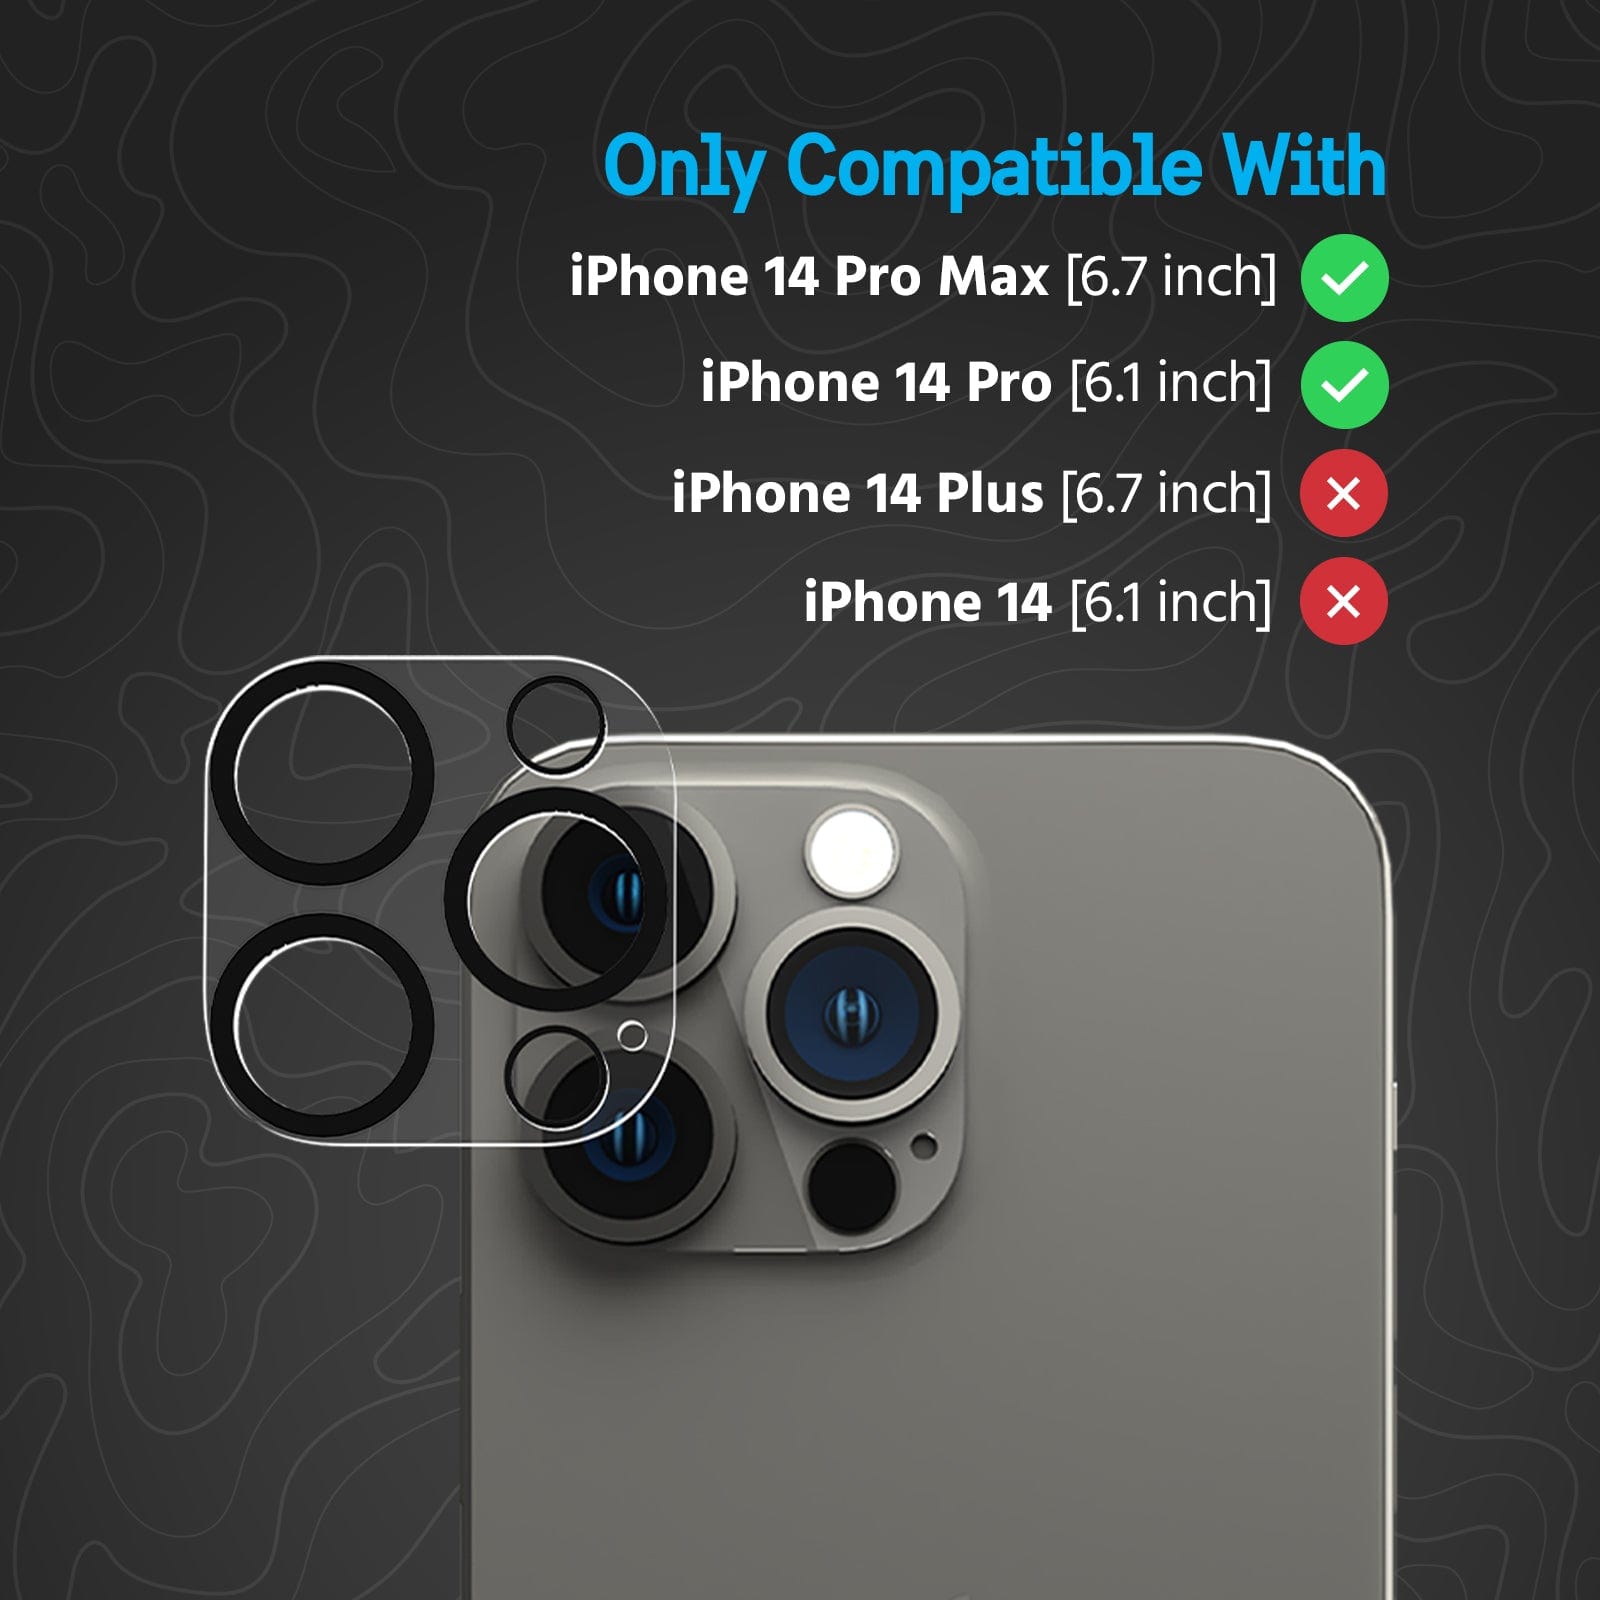 Only compatible with iPhone 14 Pro Max and iPhone 14 Pro.